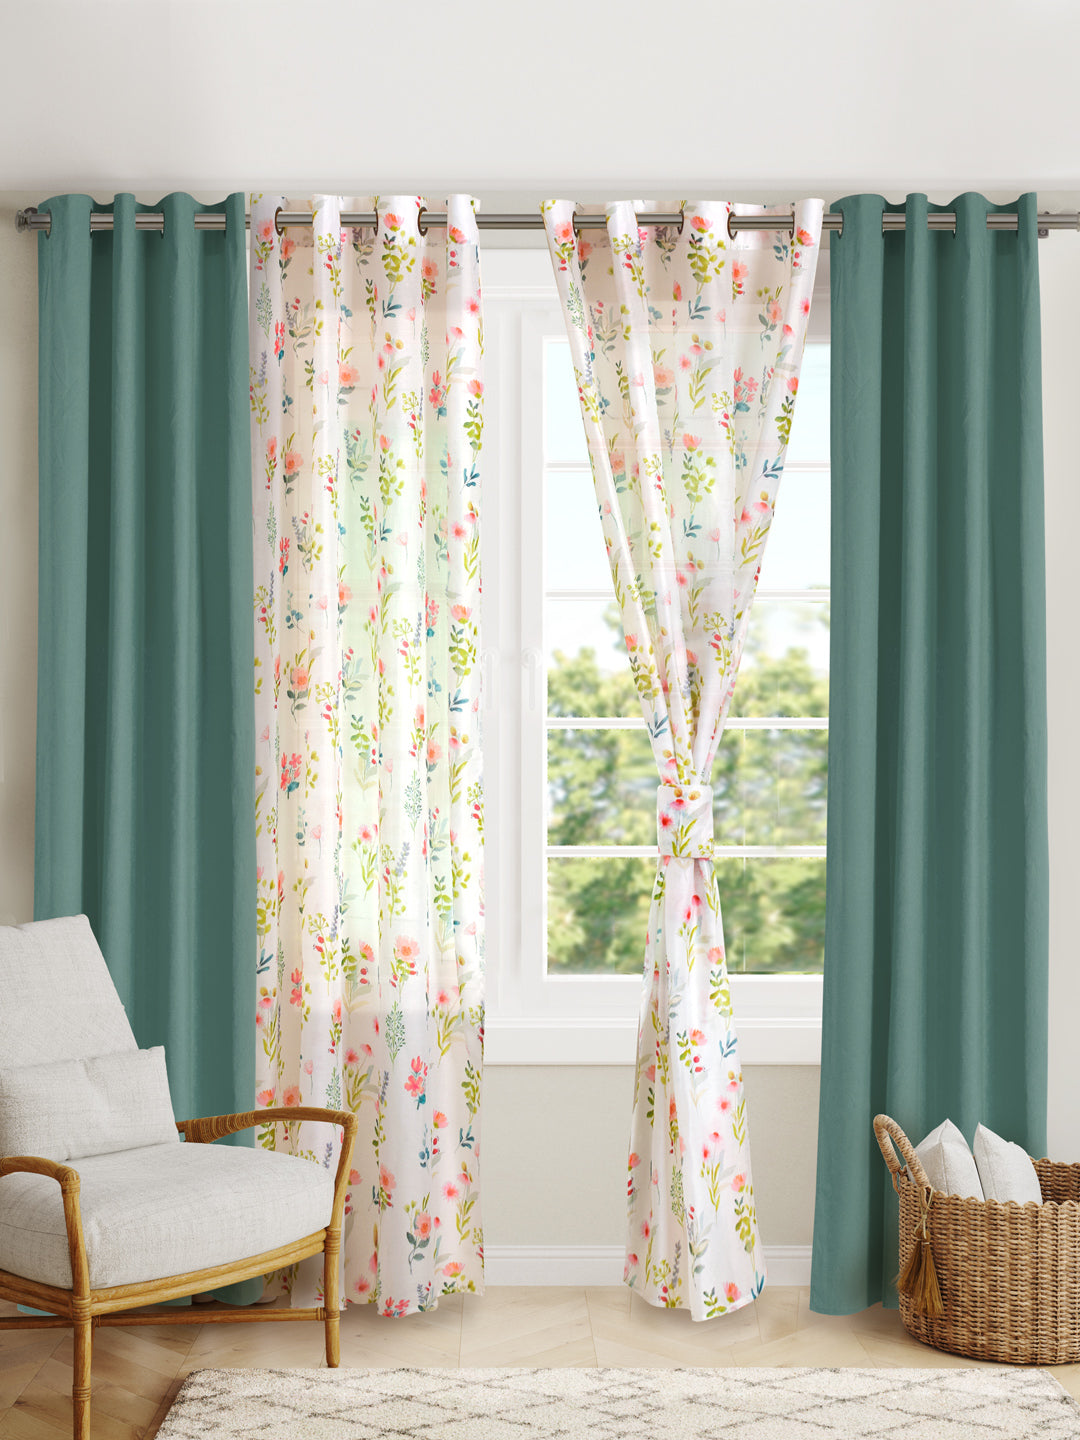 Blanc9 Set Of 4 Flora Printed With Green Plain 7Ft. Curtains